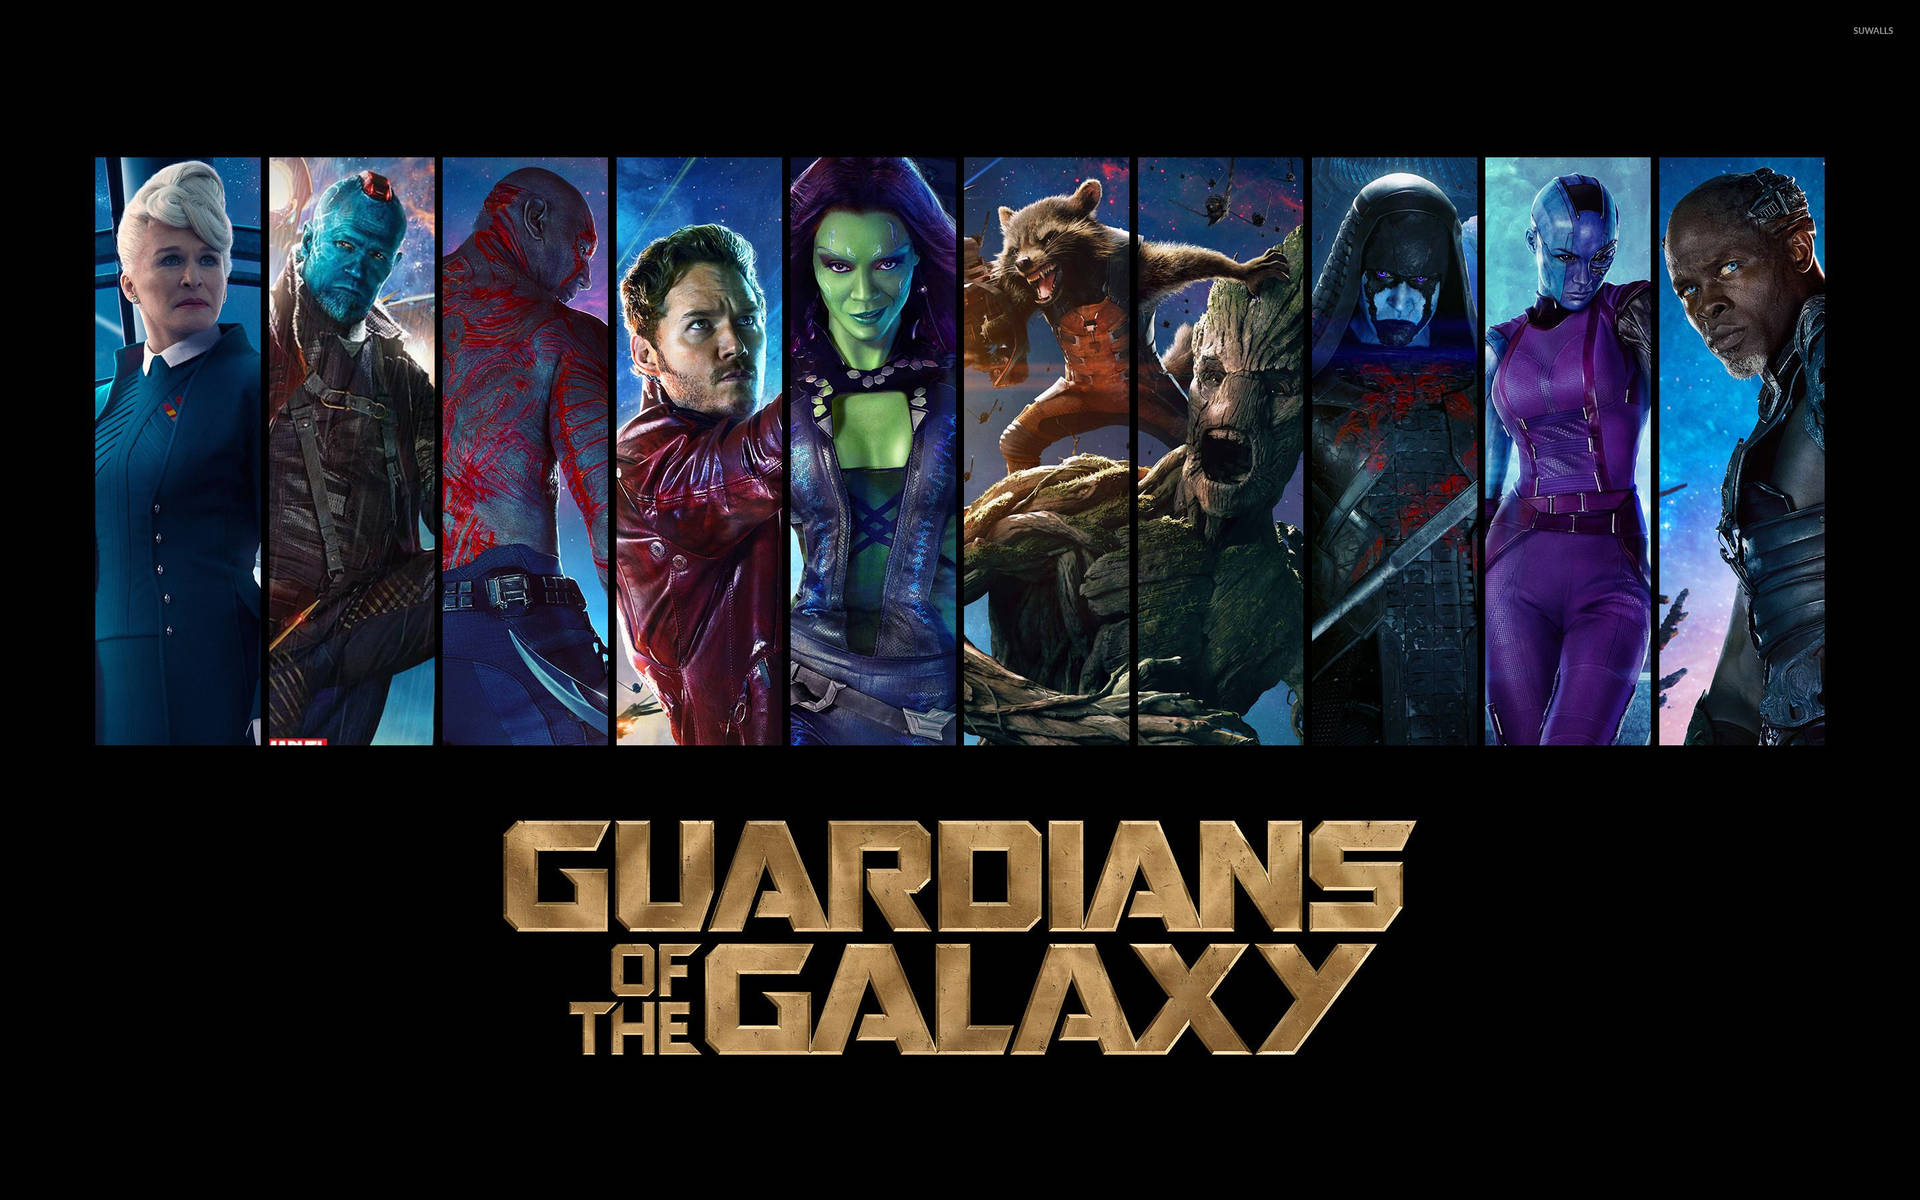 A Heroic Themed 4K Wallpaper of Guardians of the Galaxy Wallpaper